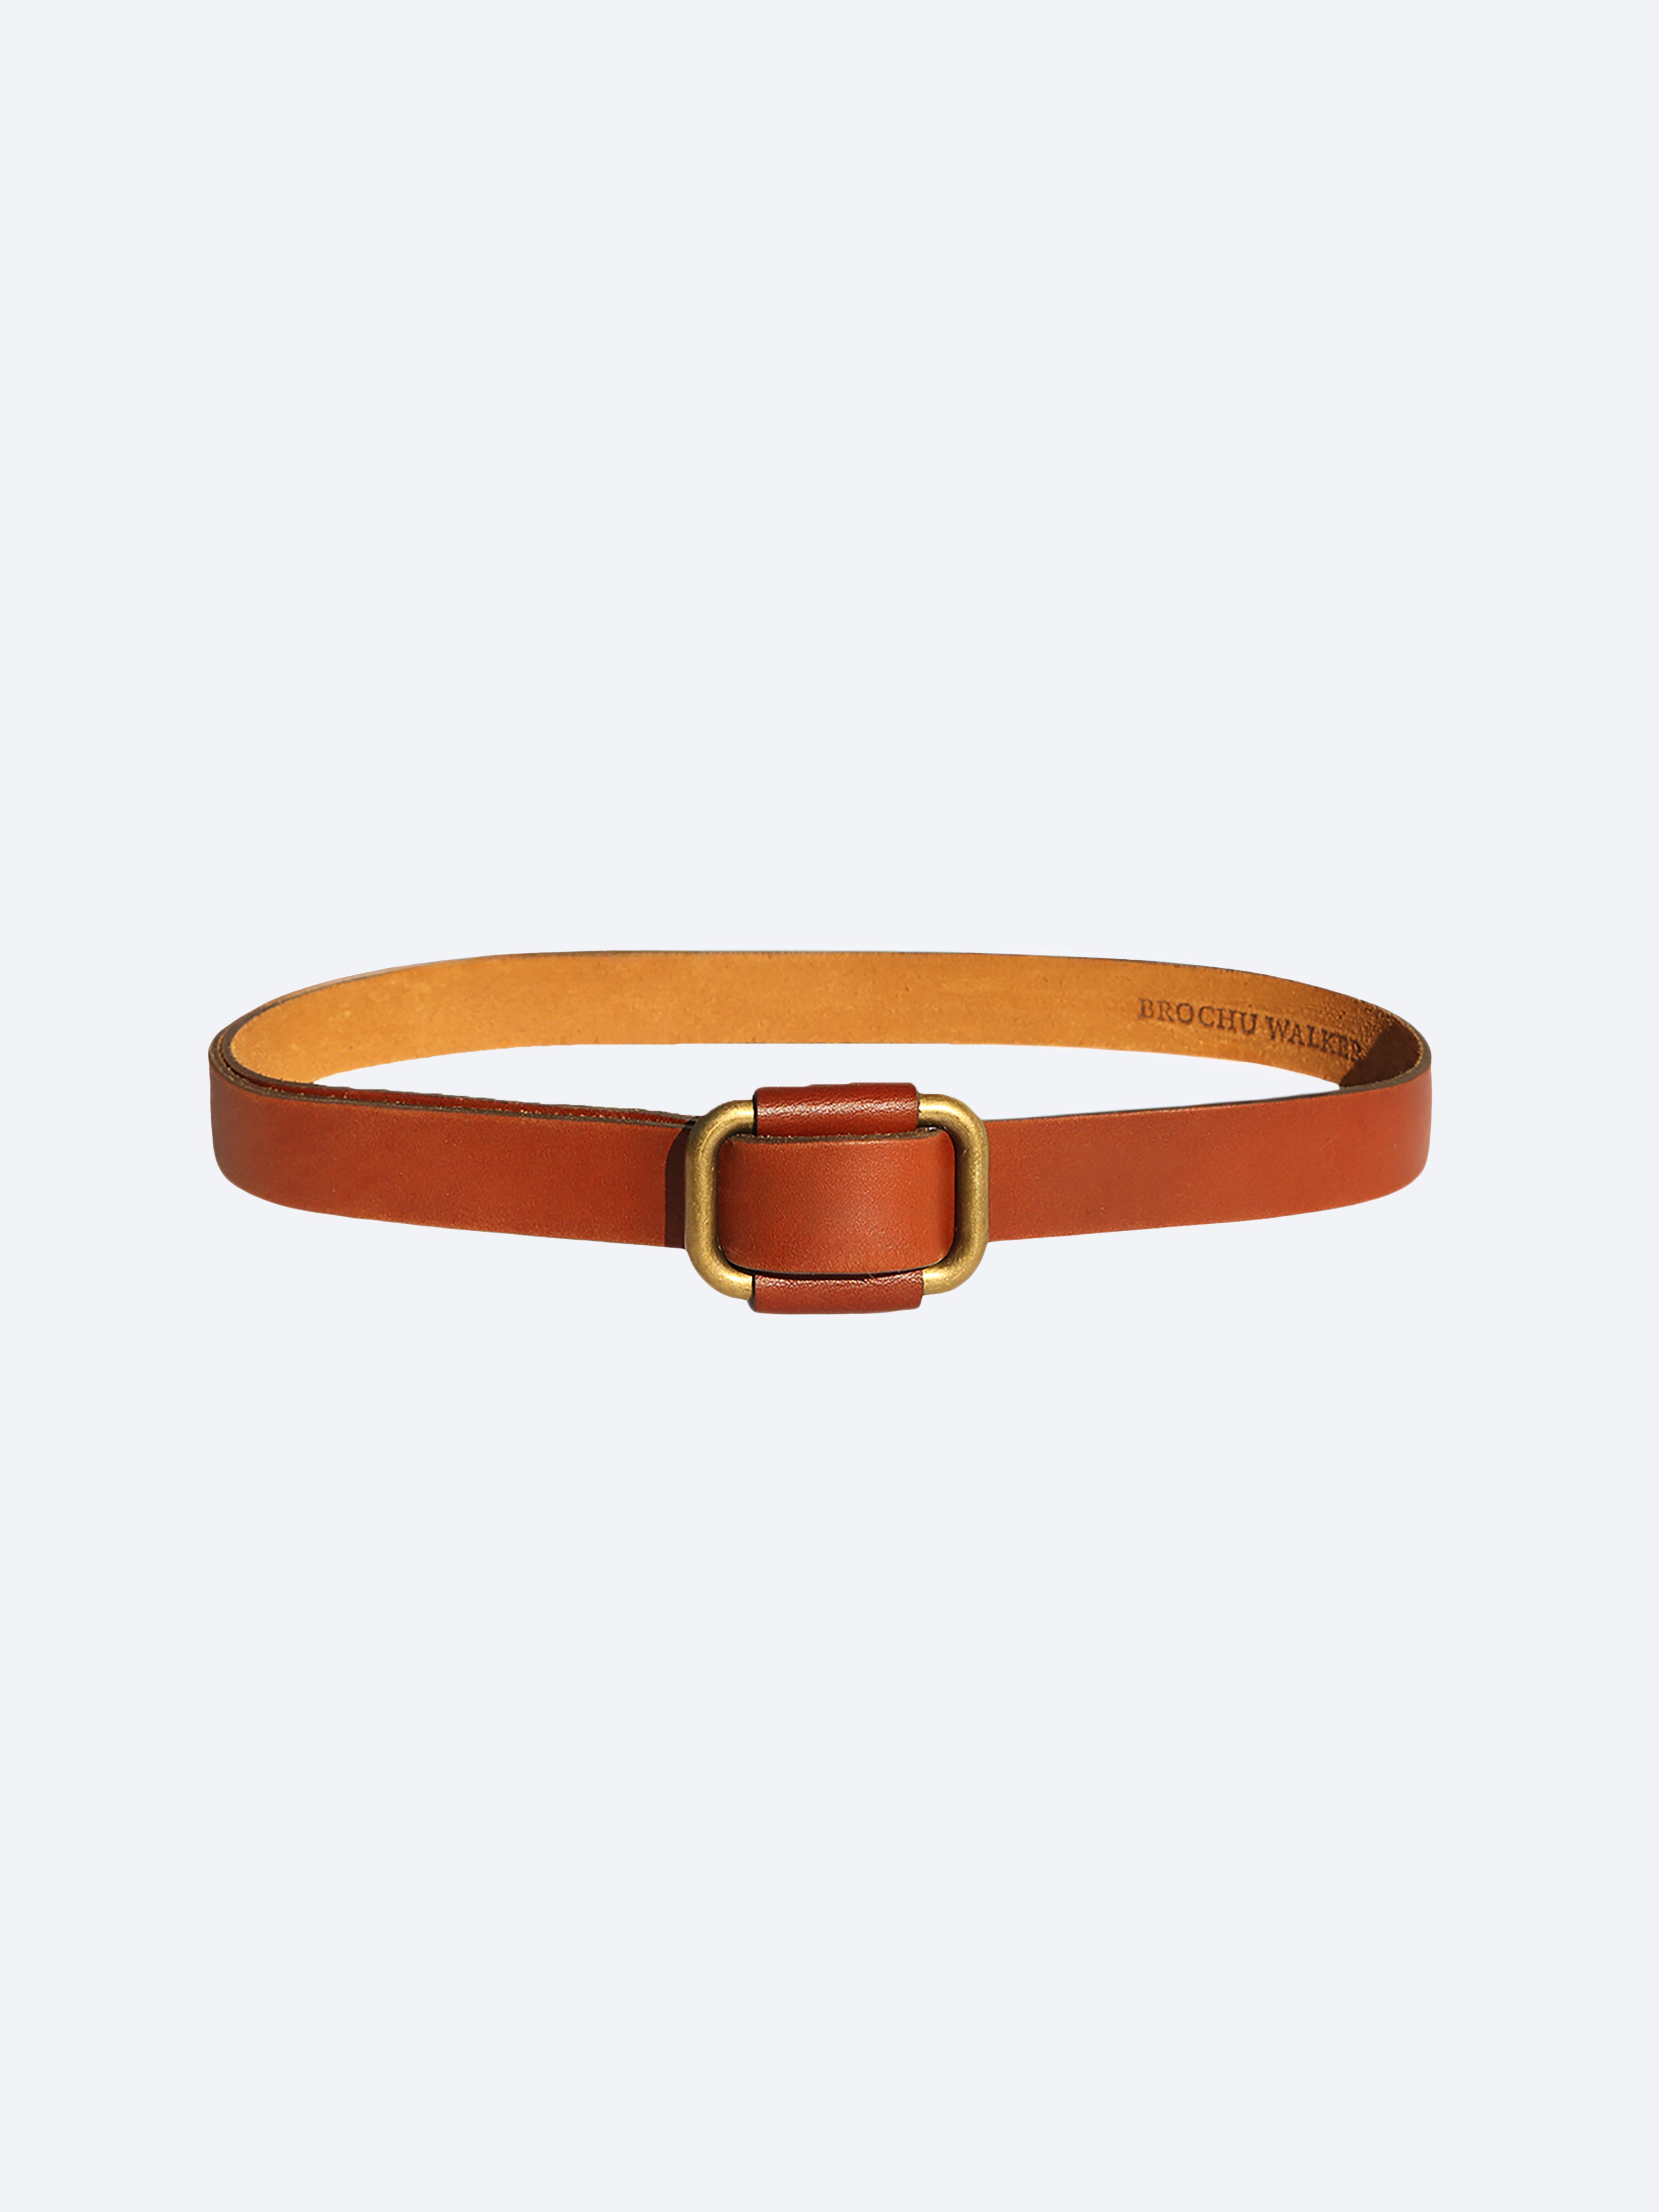 Saddle brown leather buckle belt front view